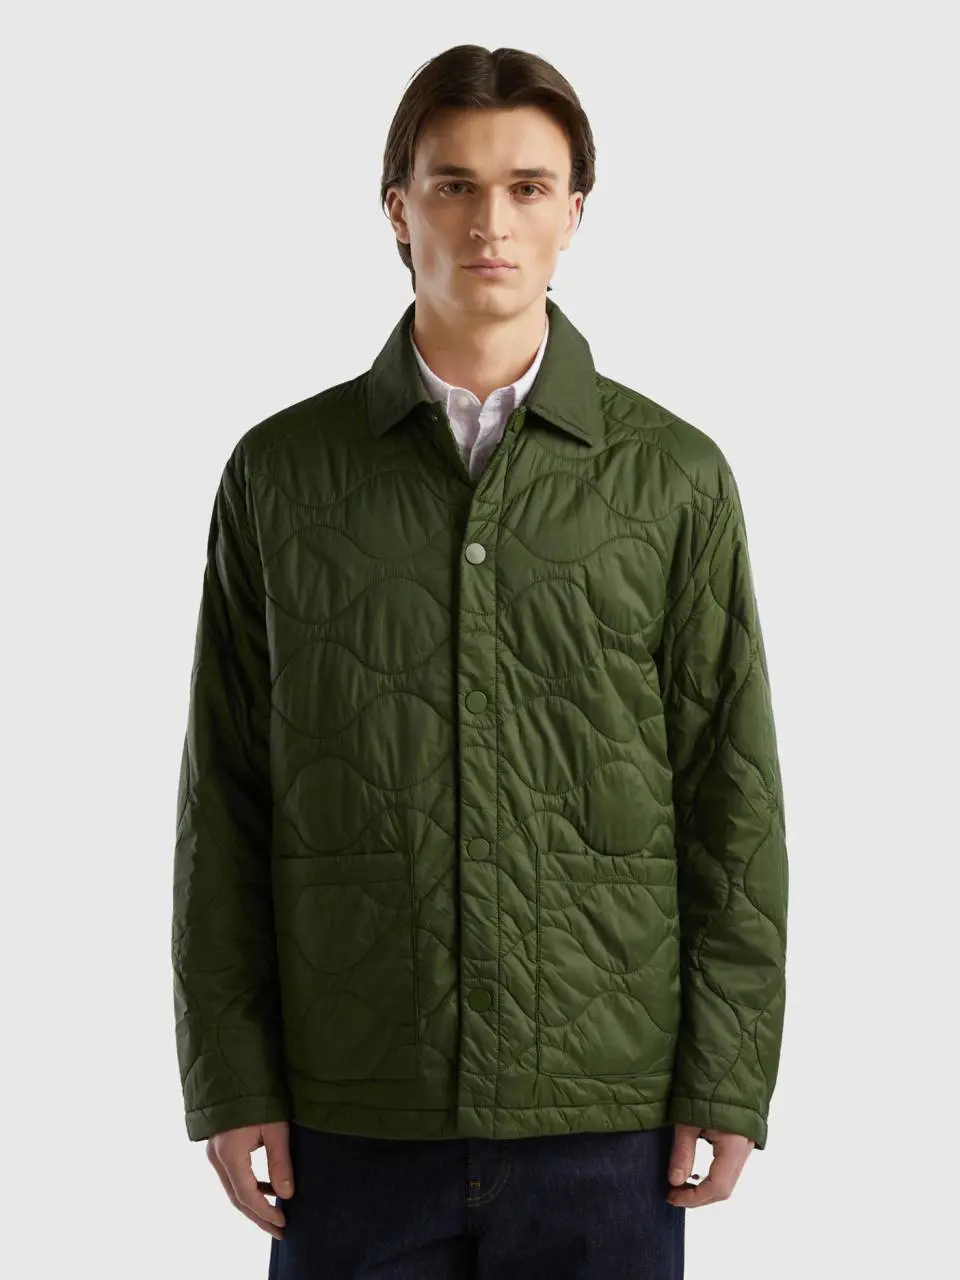 Benetton quilted jacket with collar. 1